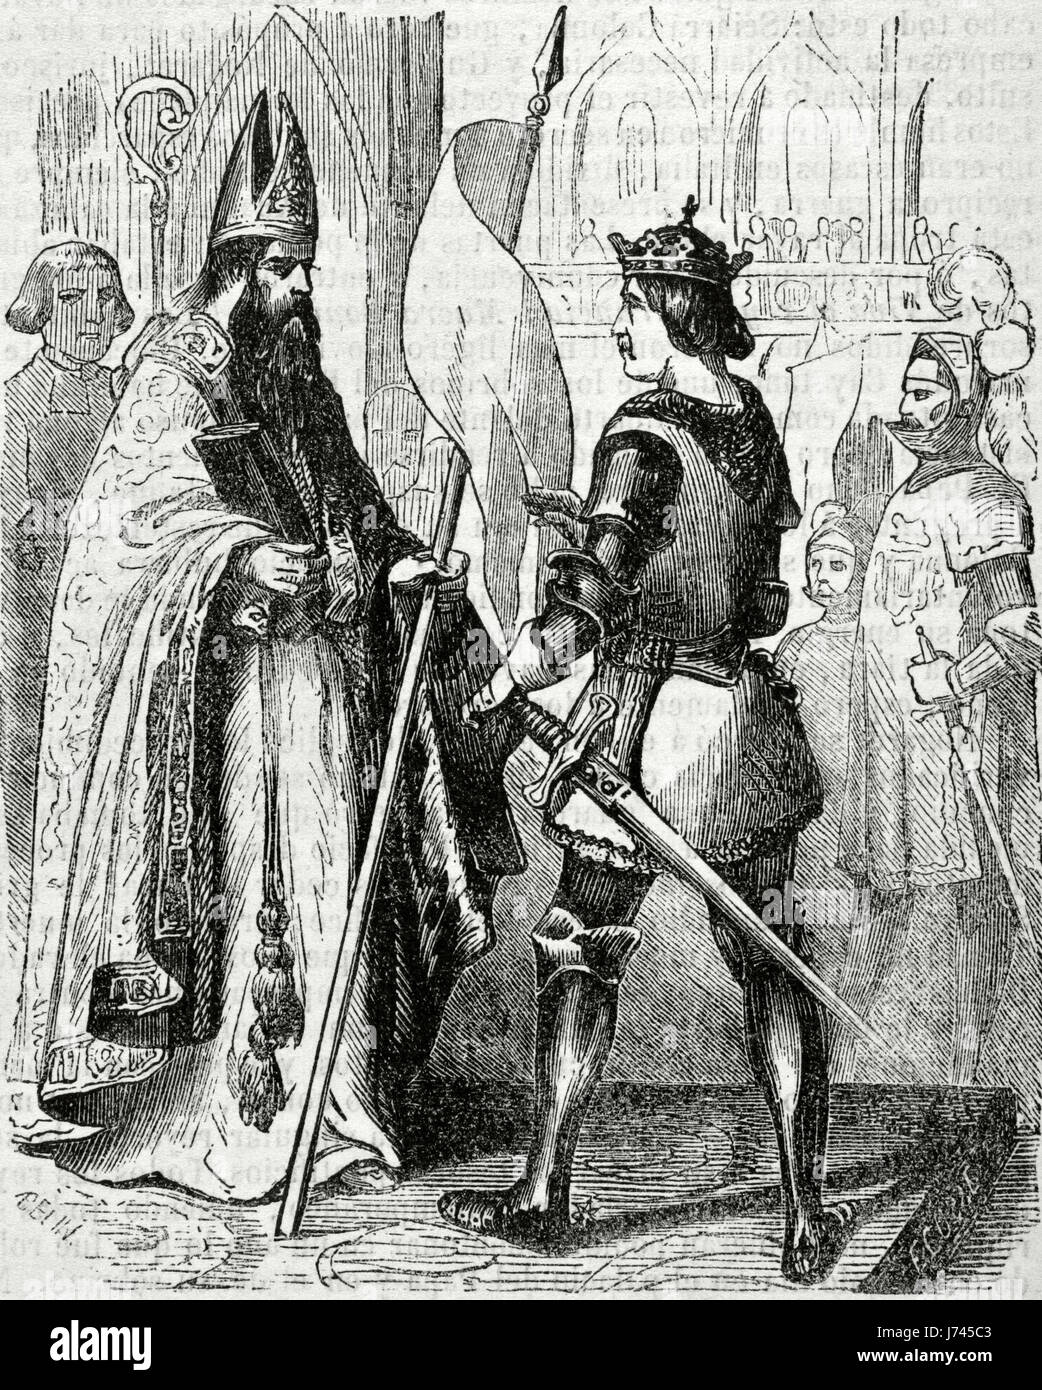 King Philip VI of France (1293-1350), the Fortunate, taking the oriflamme of St. Denis. Engraving by Ecosse, 1851. Stock Photo